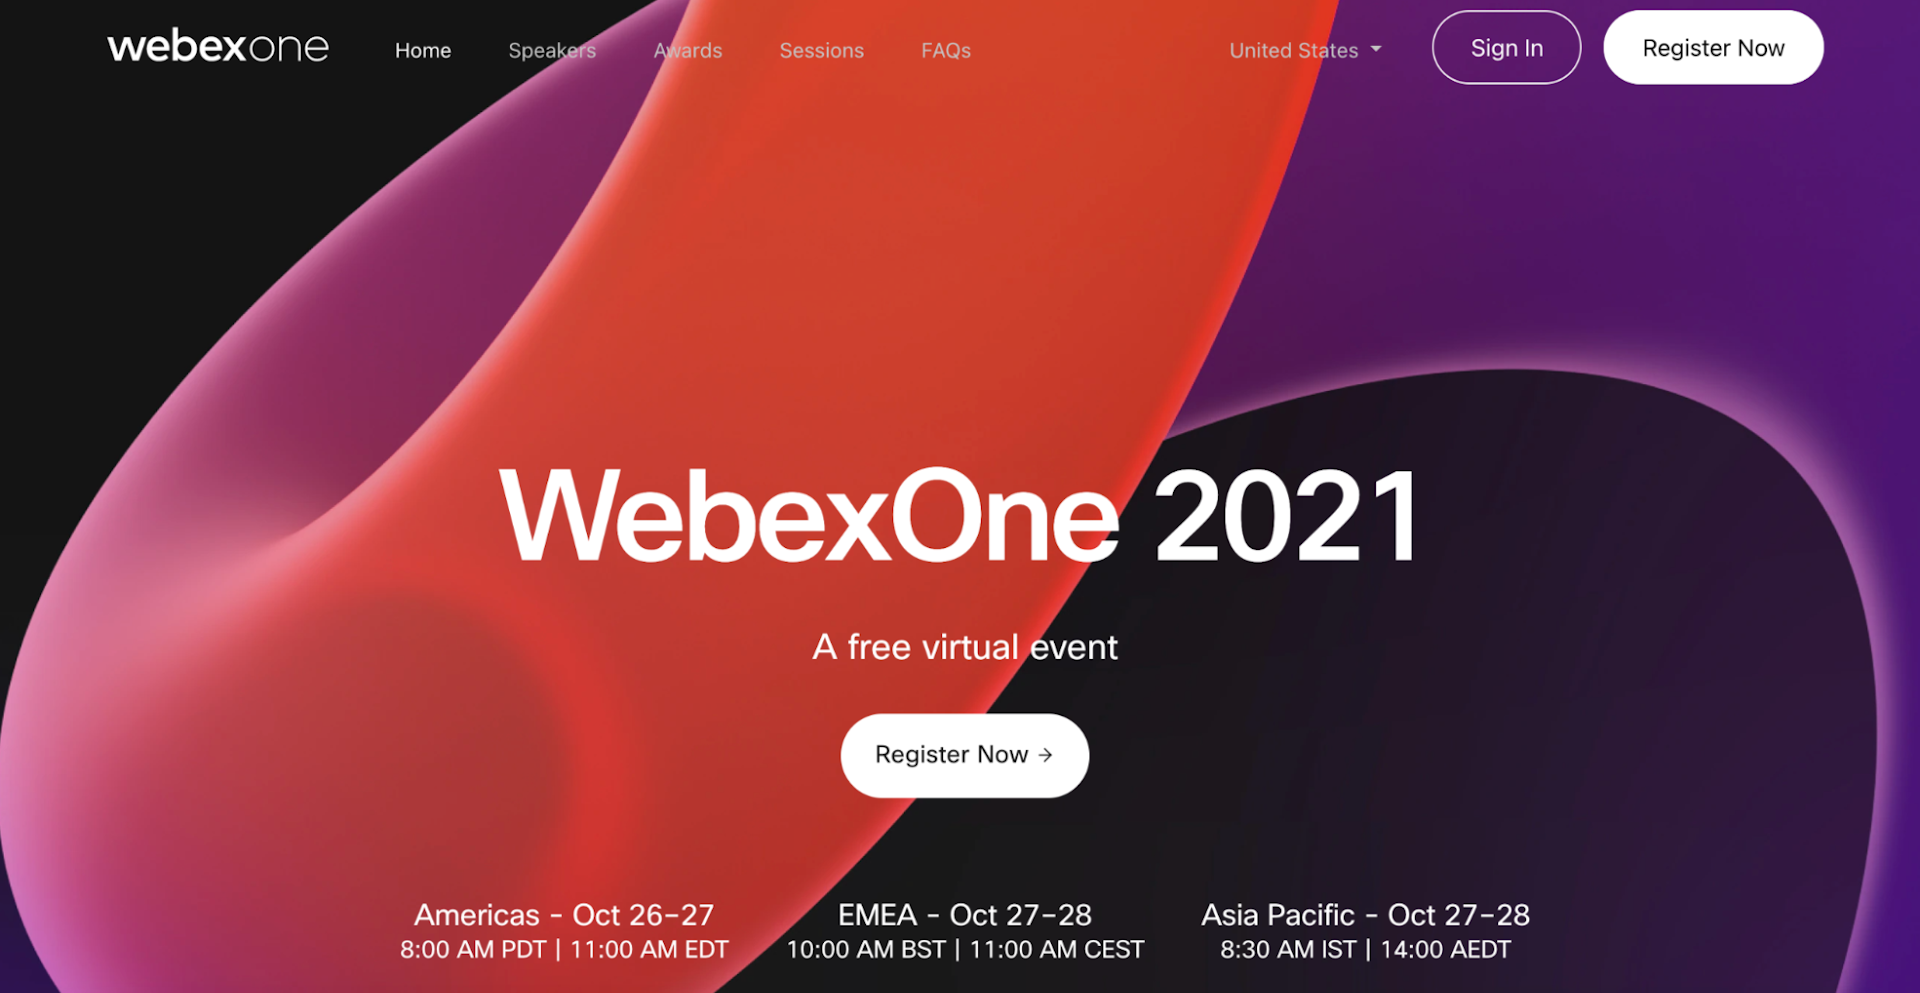 Event registration for Cisco's Webex One Conference